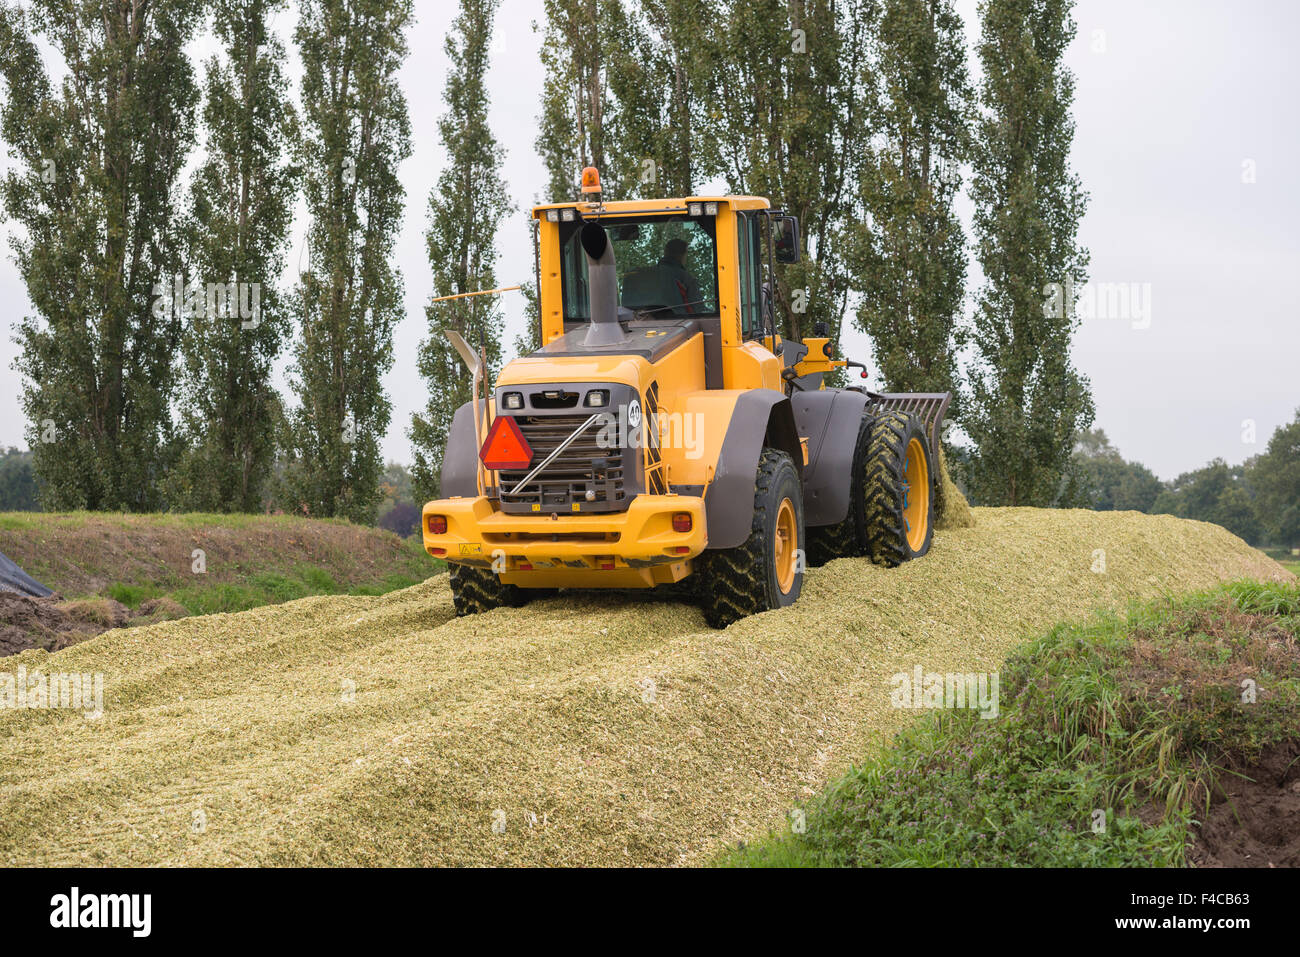 Agriculture shredded corn silage with a yellow shovel in the Netherlands Stock Photo